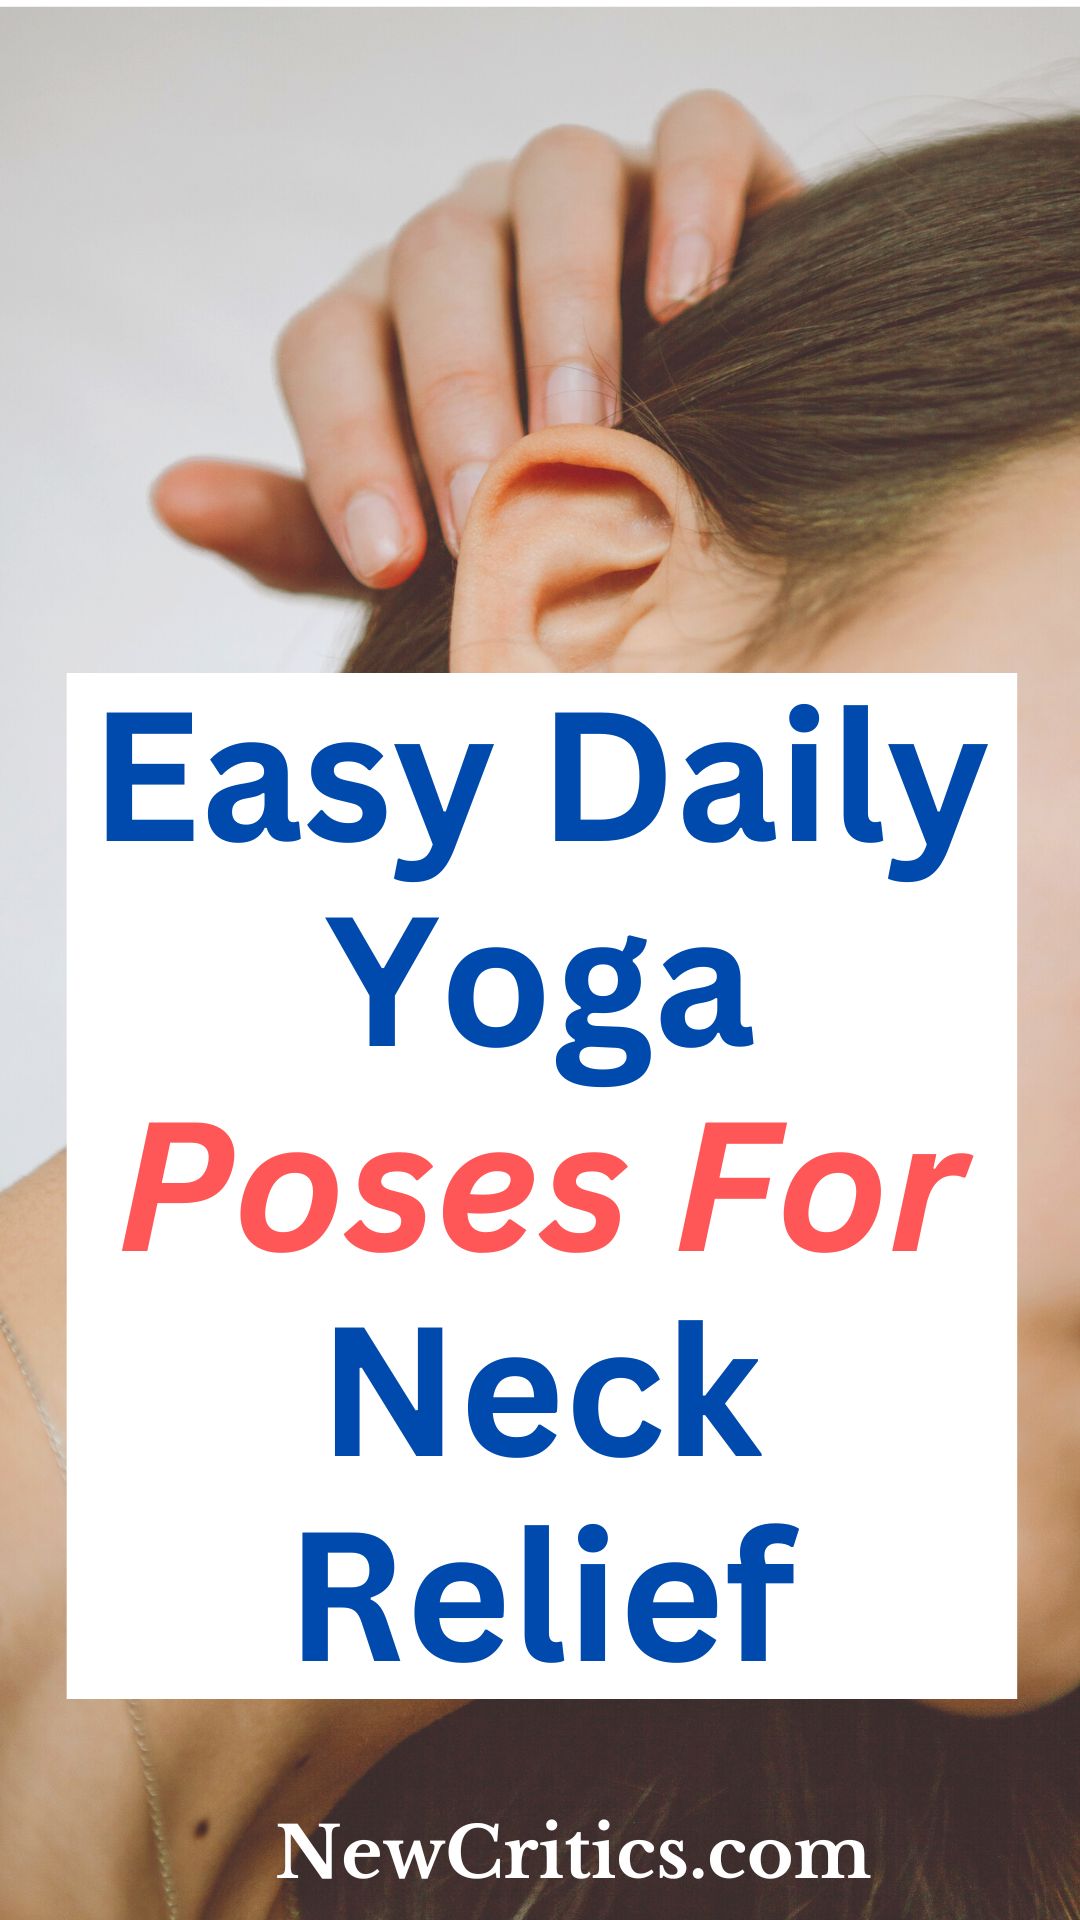 Easy Daily Yoga Poses For Neck Relief / Canva